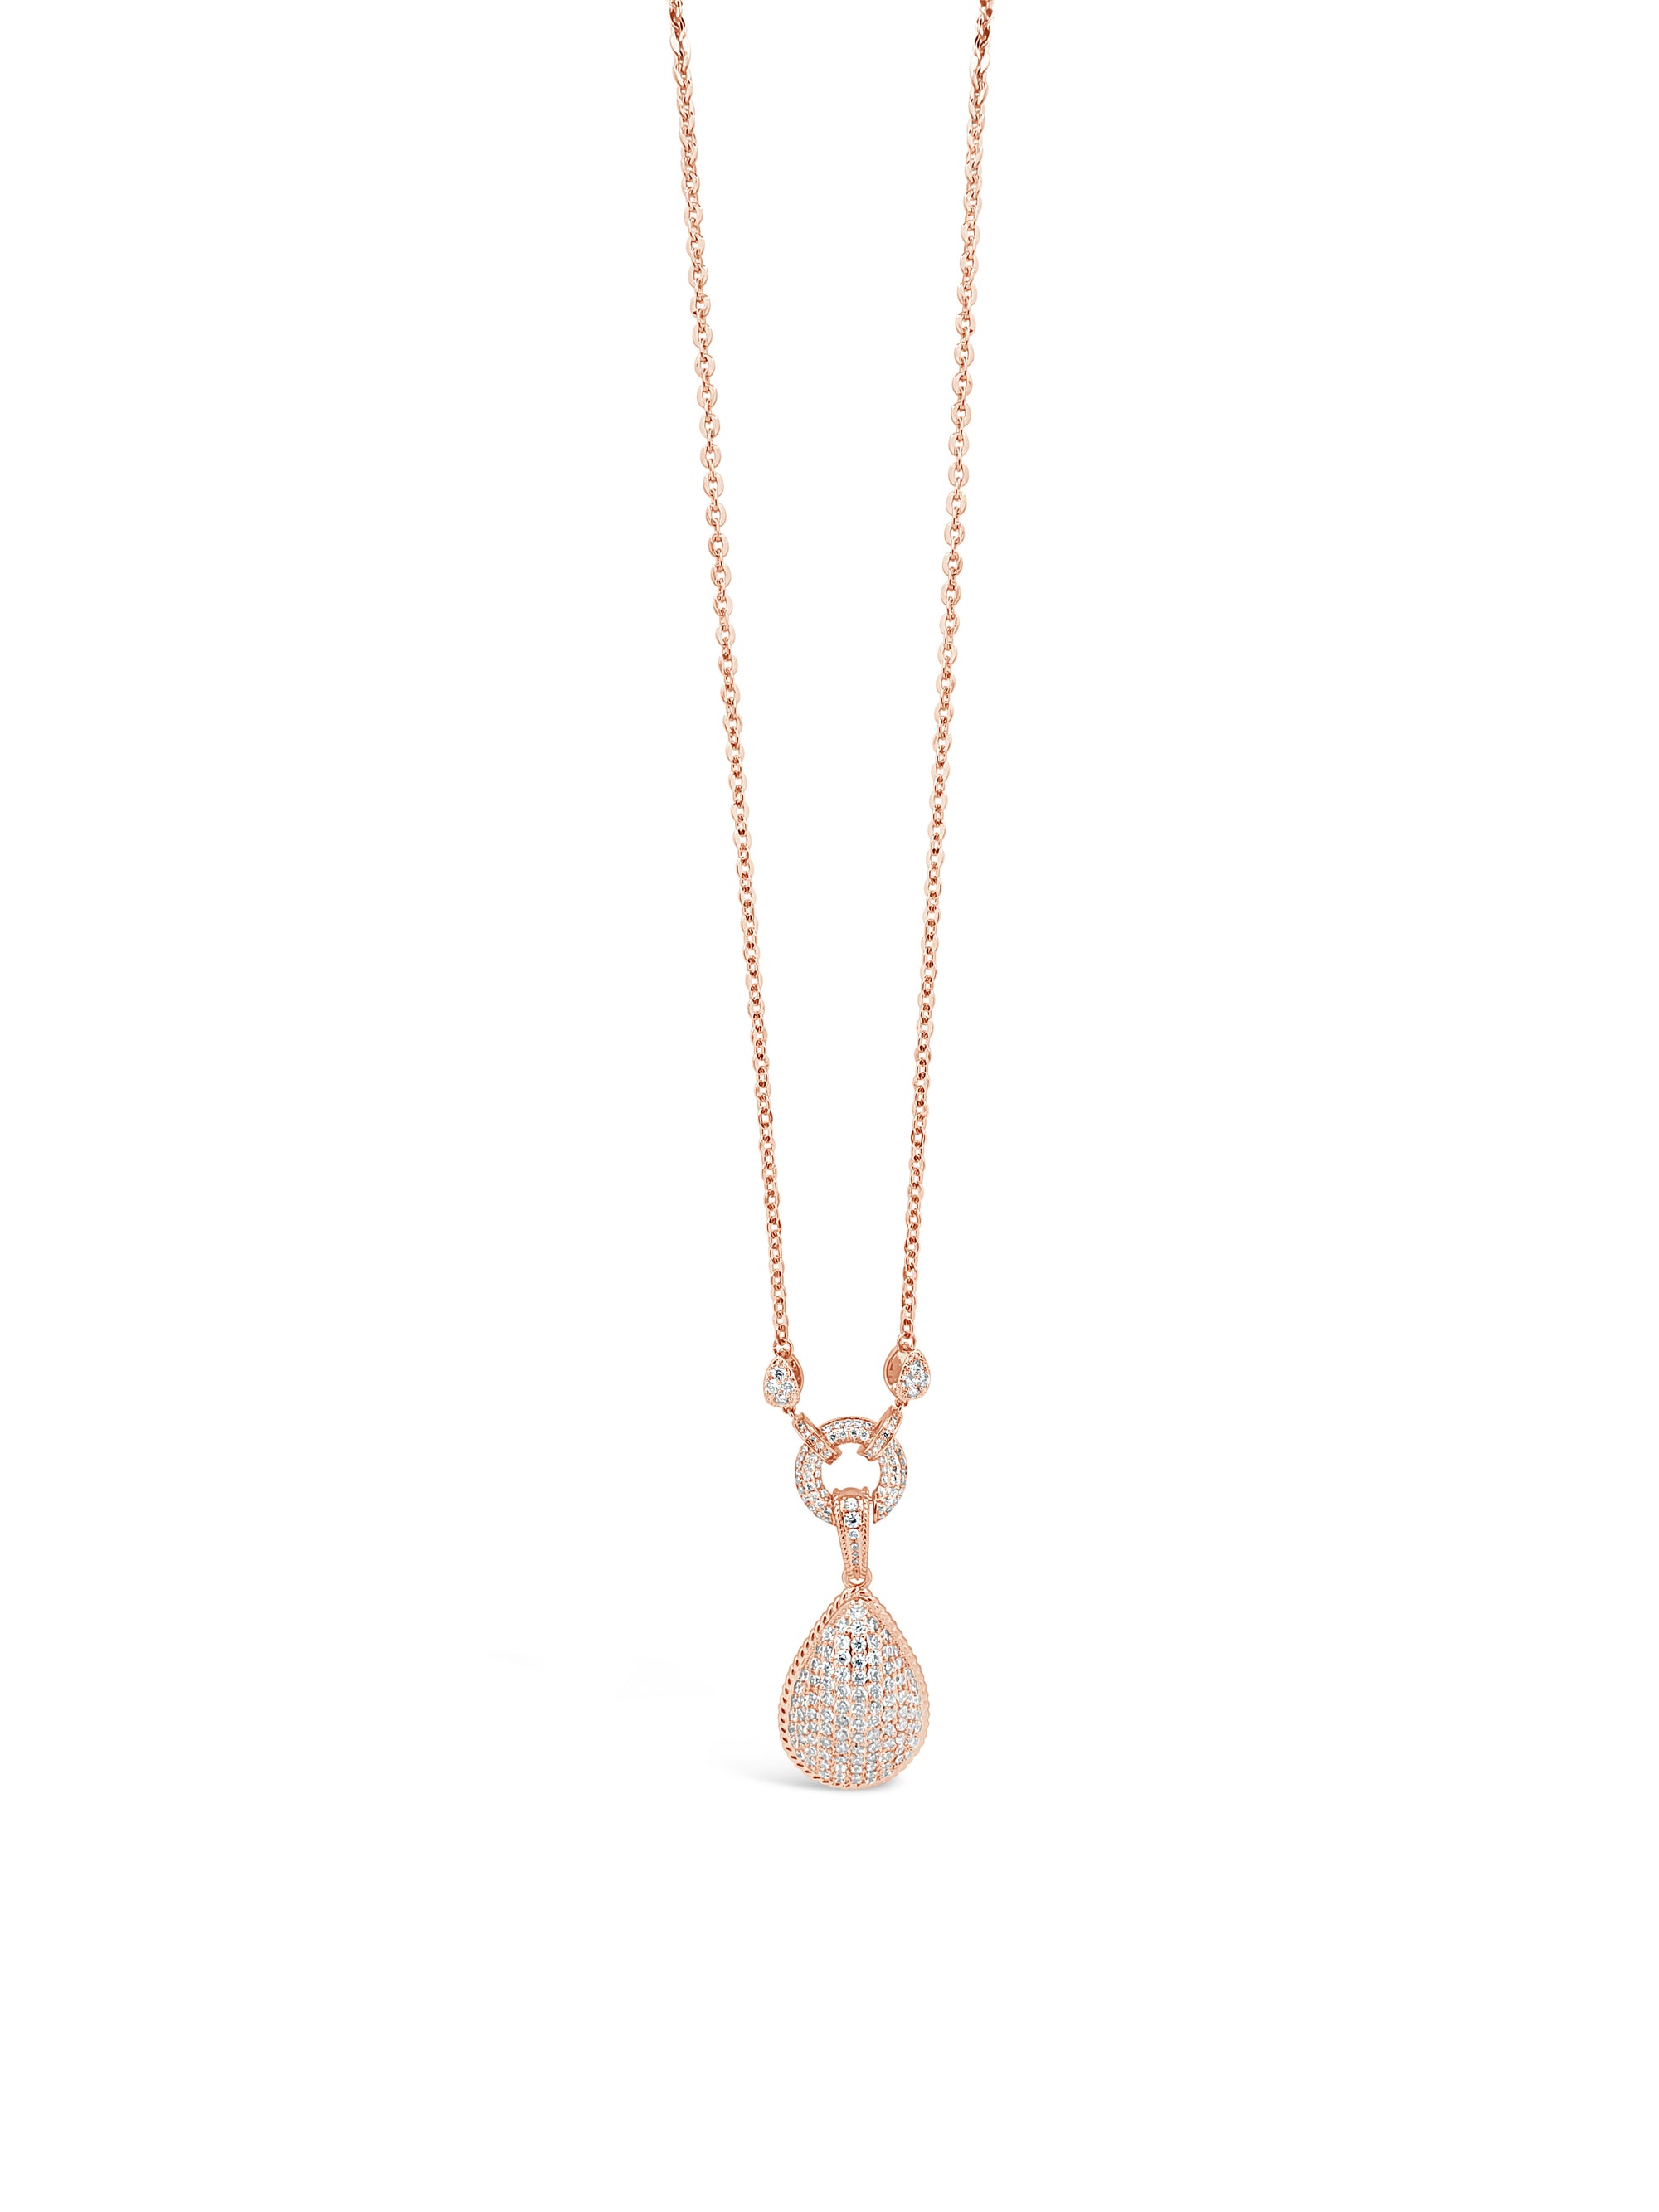 Absolute Jewellery Necklace Rose Gold 24"